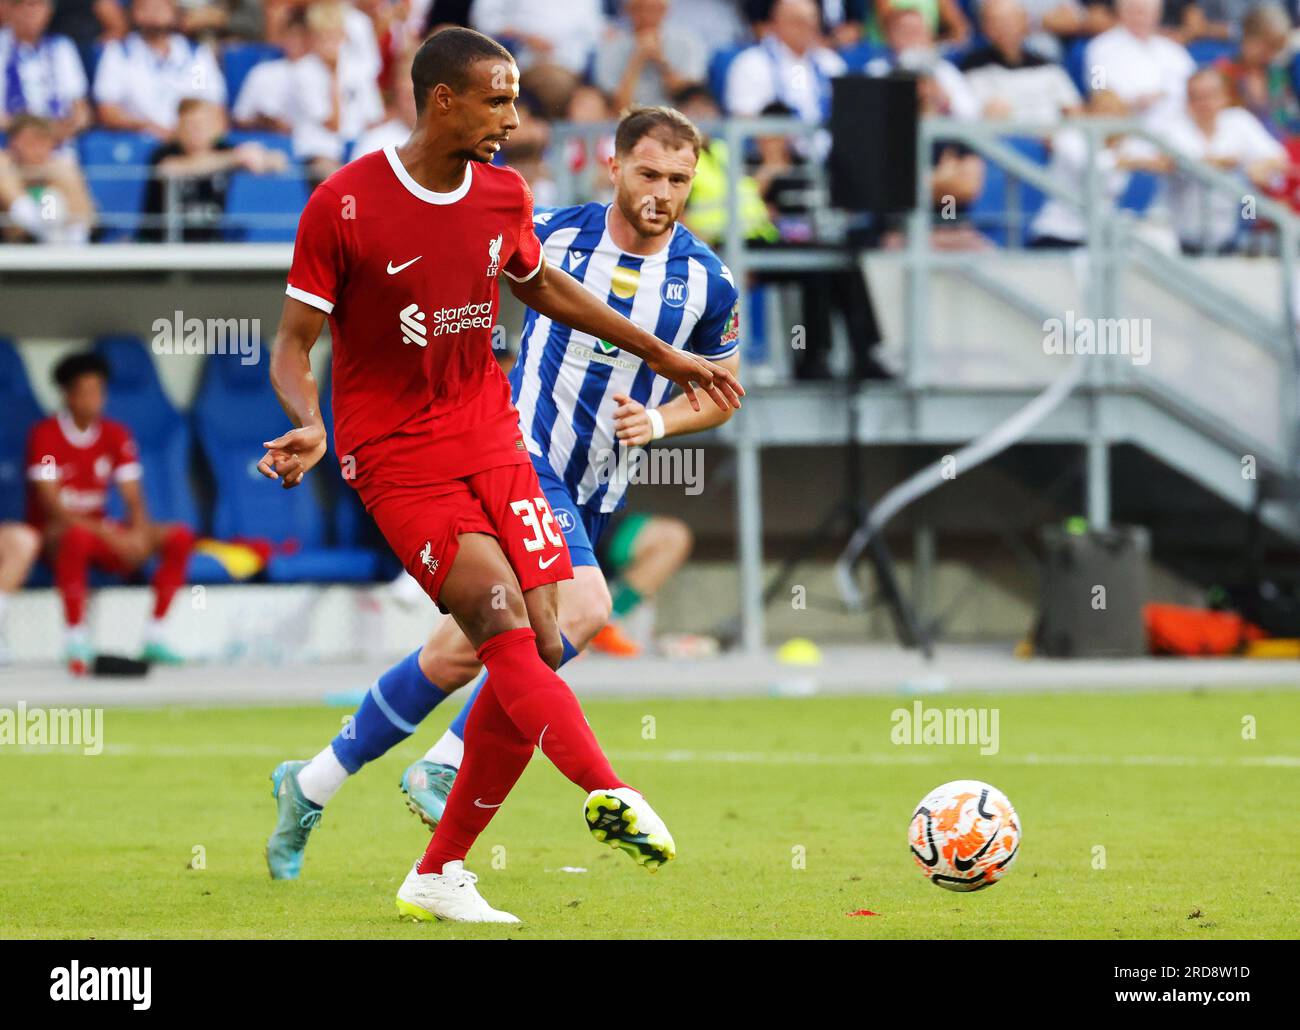 Karlsruhe, Germany. 19th July, 2023. Soccer: Test matches, Karlsruher SC - FC Liverpool: Liverpool's Joel Matip (front) and Karlsruhe's Budu Zivzivadze fight for the ball. Credit: Philipp von Ditfurth/dpa/Alamy Live News Stock Photo